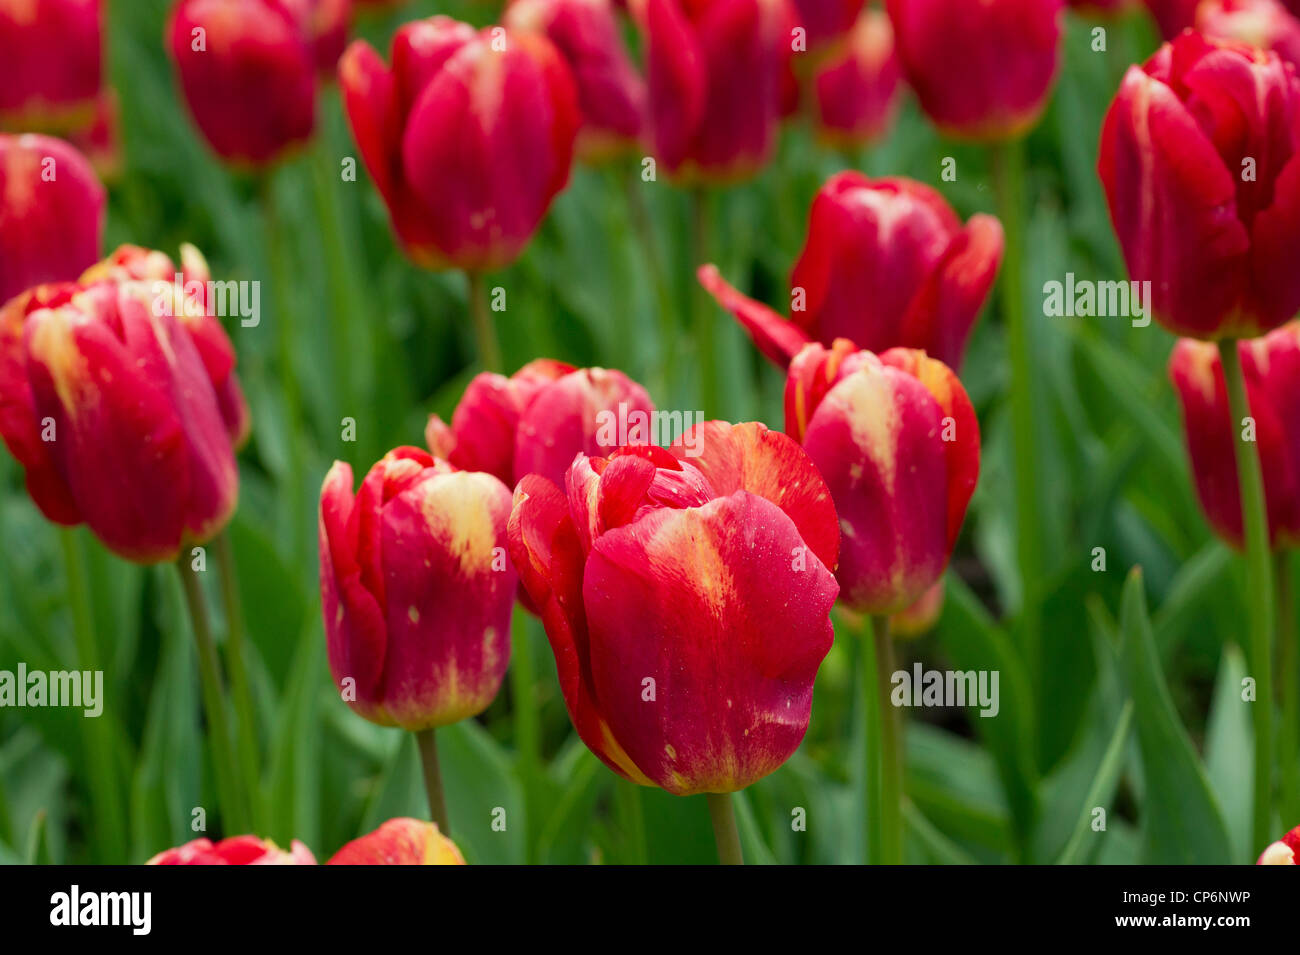 Field with red and yellow tulips Stock Photo